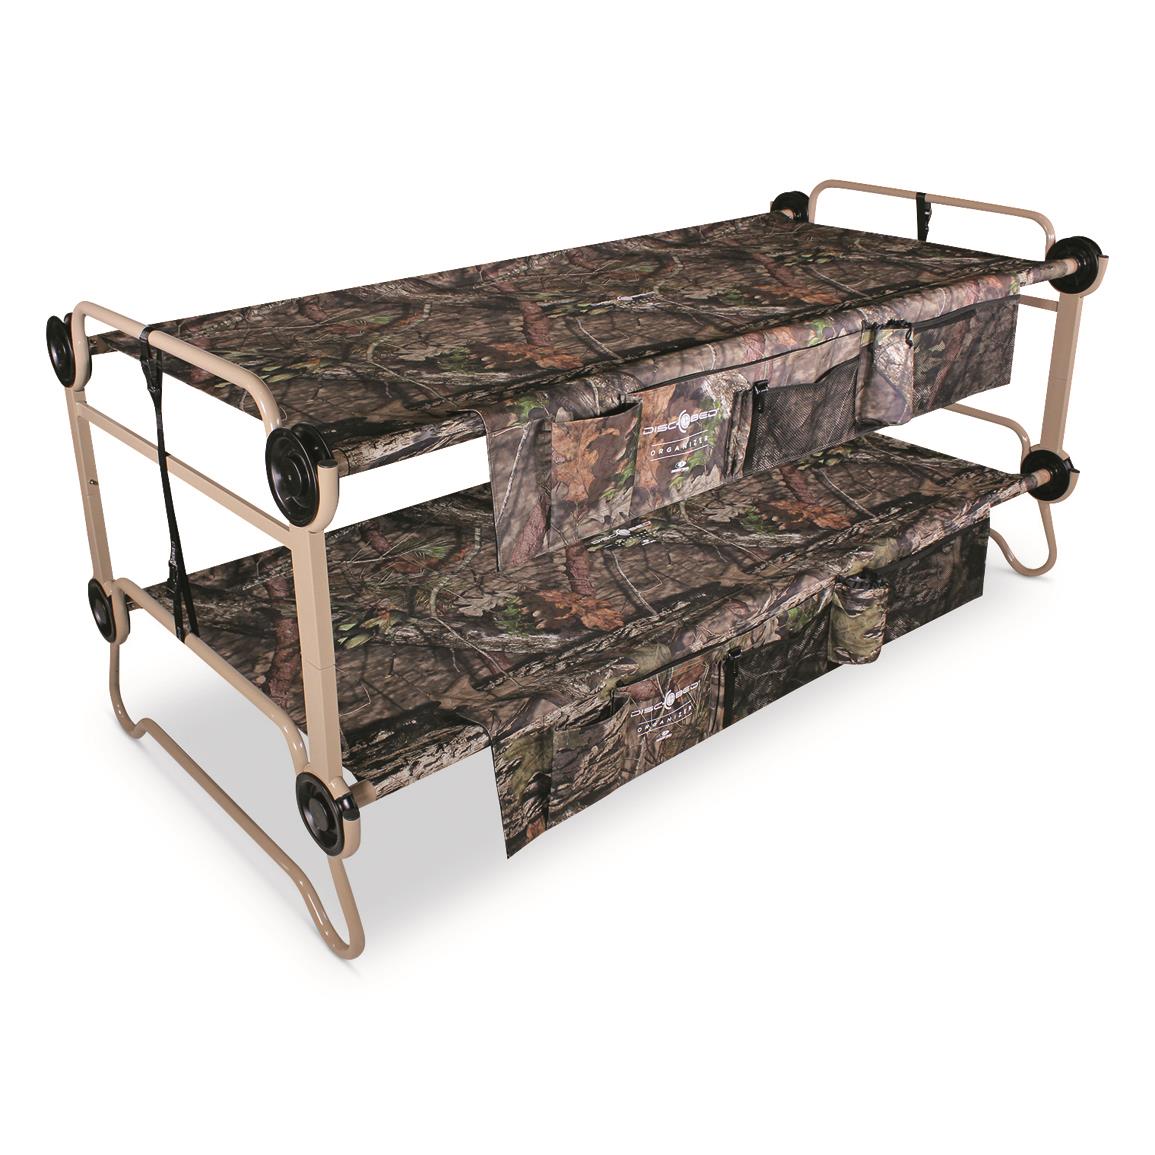 XL Disc-O-Bed Cam-O-Bunk with Organizers, Mossy Oak